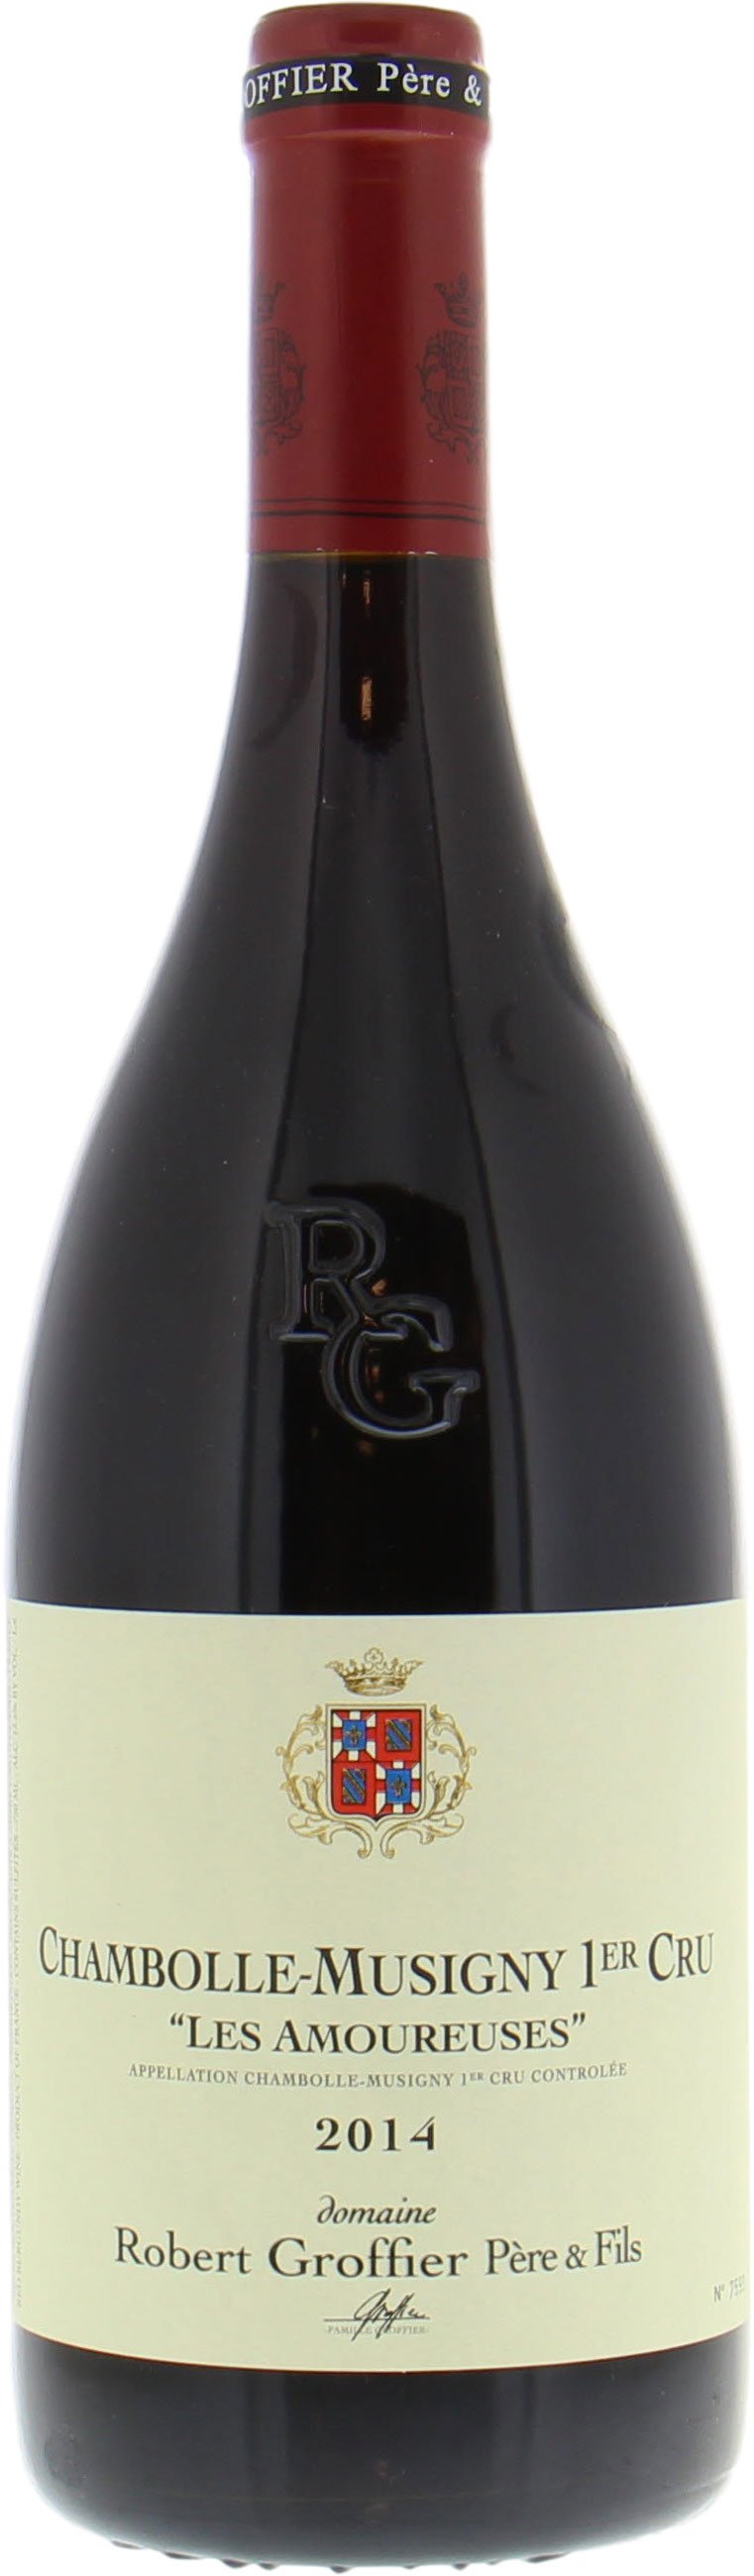 Domaine Robert Groffier - Chambolle Musigny les Amoureuses 2014 Perfect